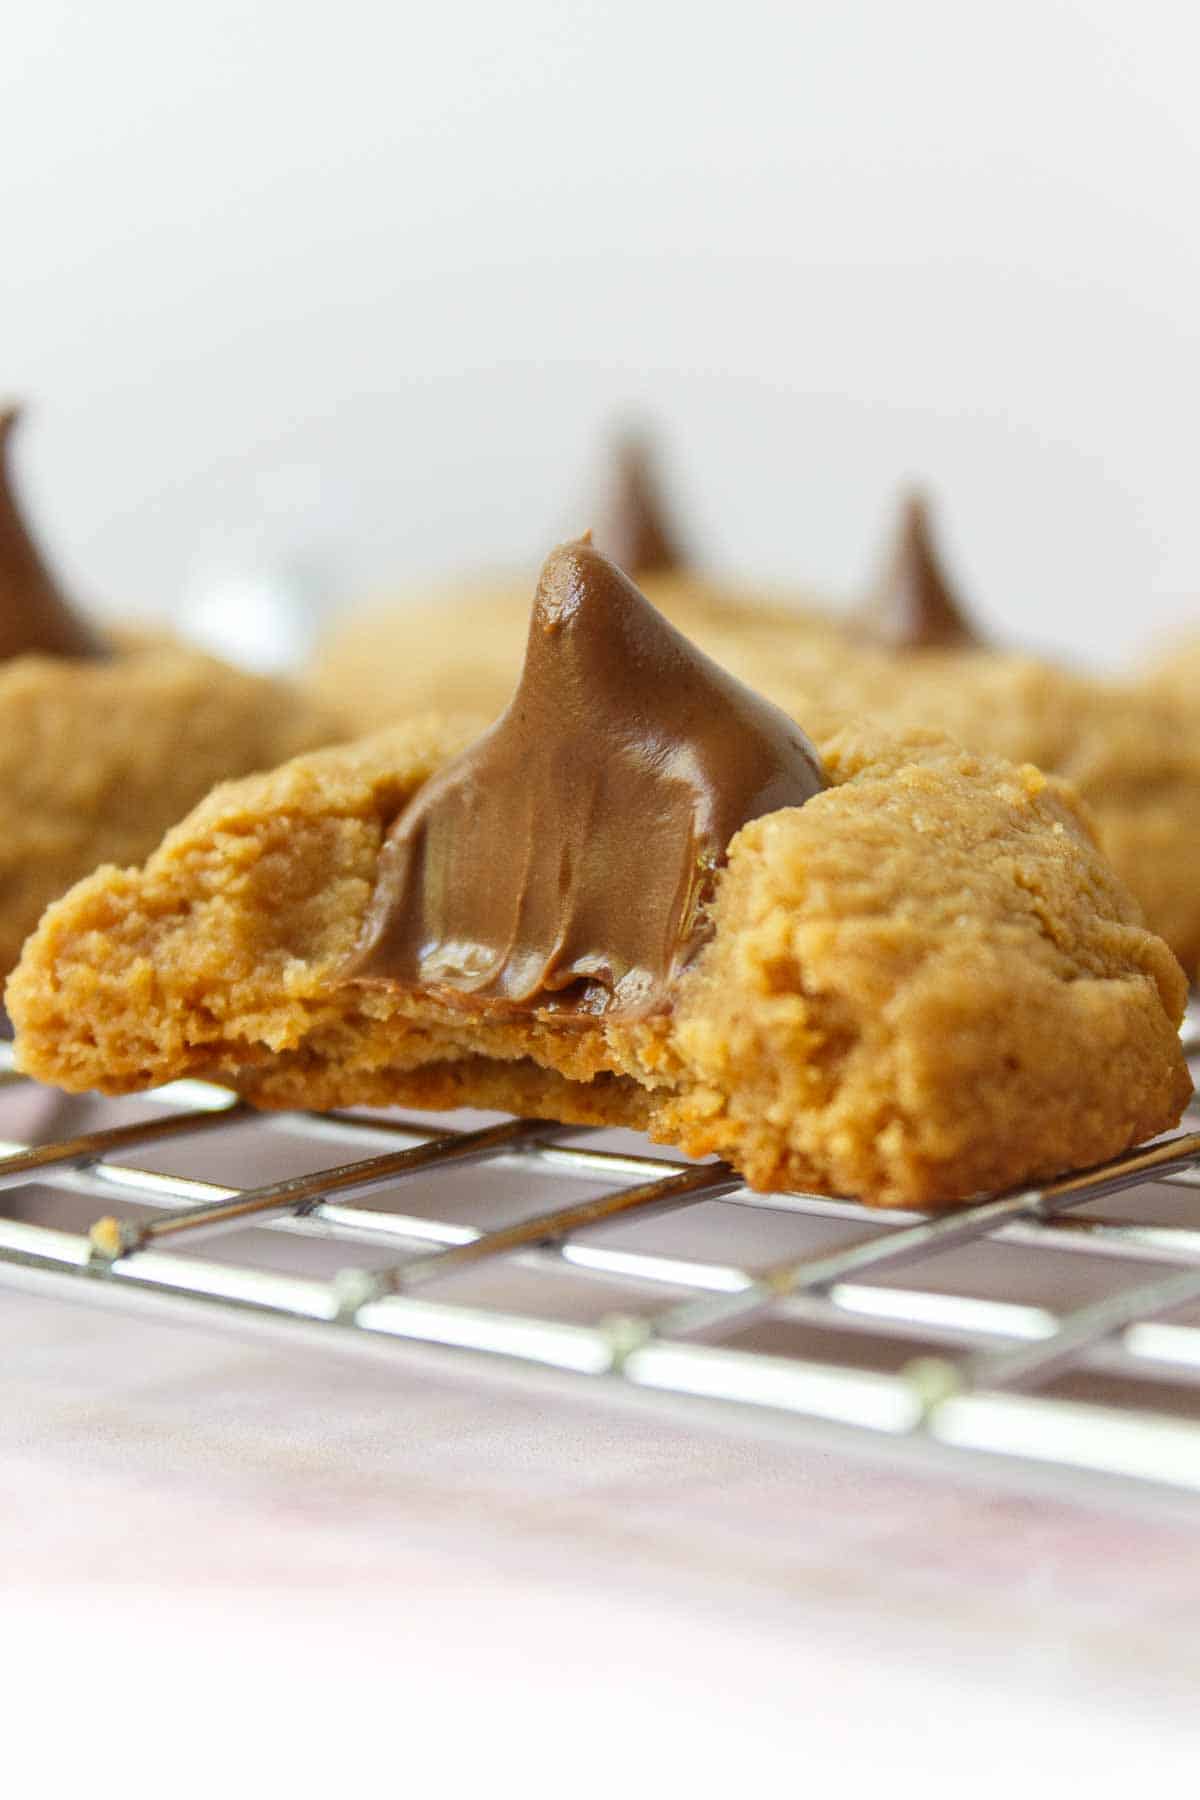 A bite is taken out of a peanut butter blossom cookie to show the creamy inside.